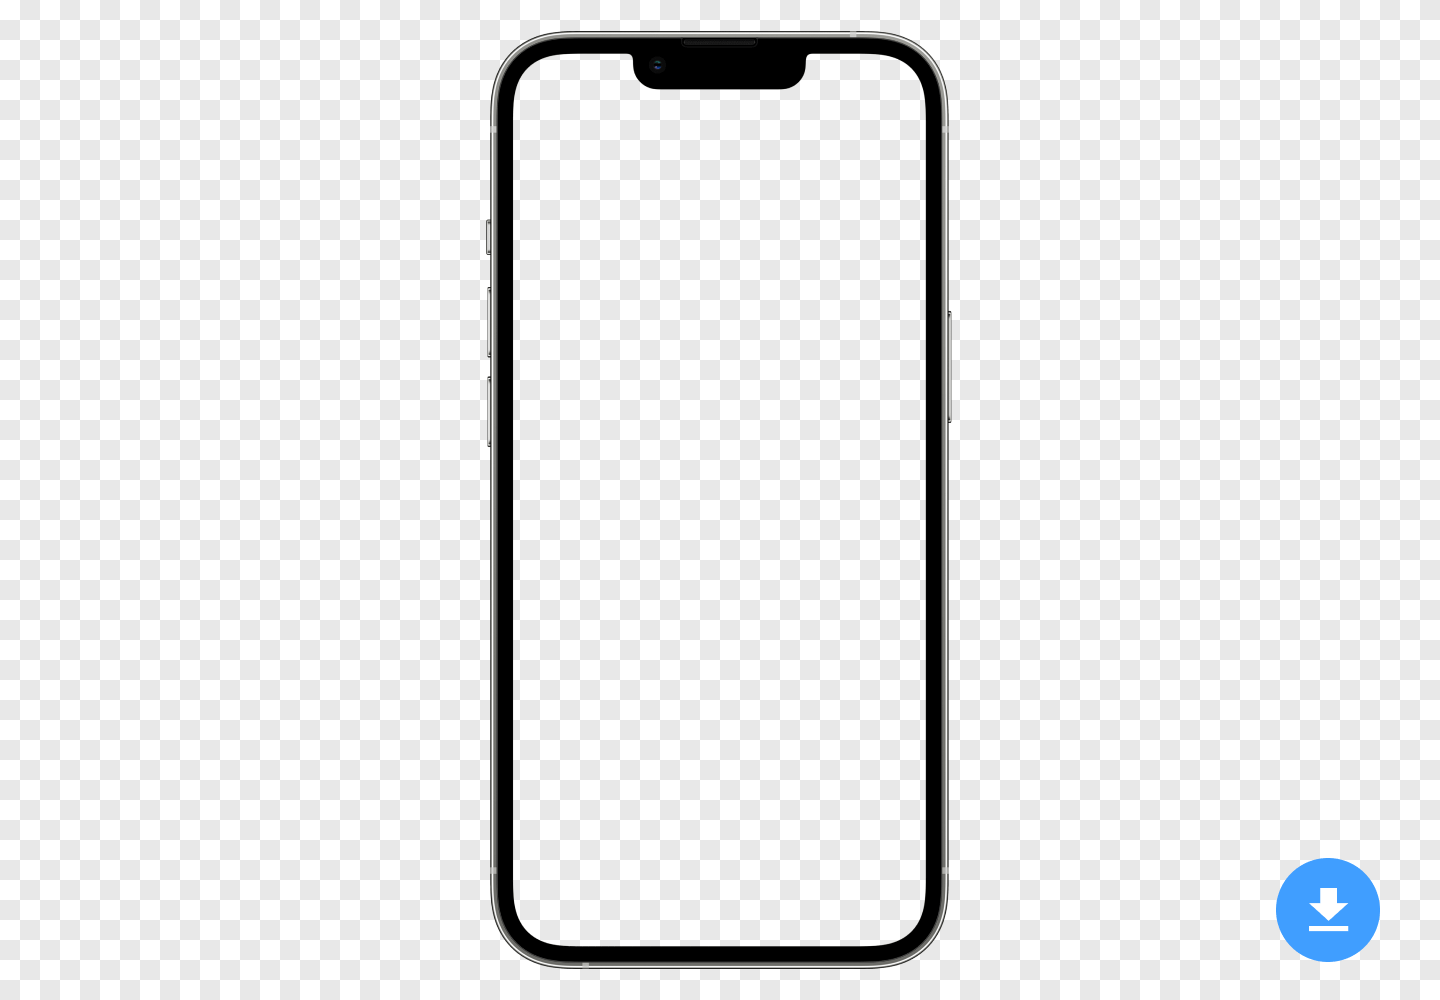 Free HD mockup of Apple iPhone 13 PRO MAX (2021) in PNG and PSD image format with transparent background